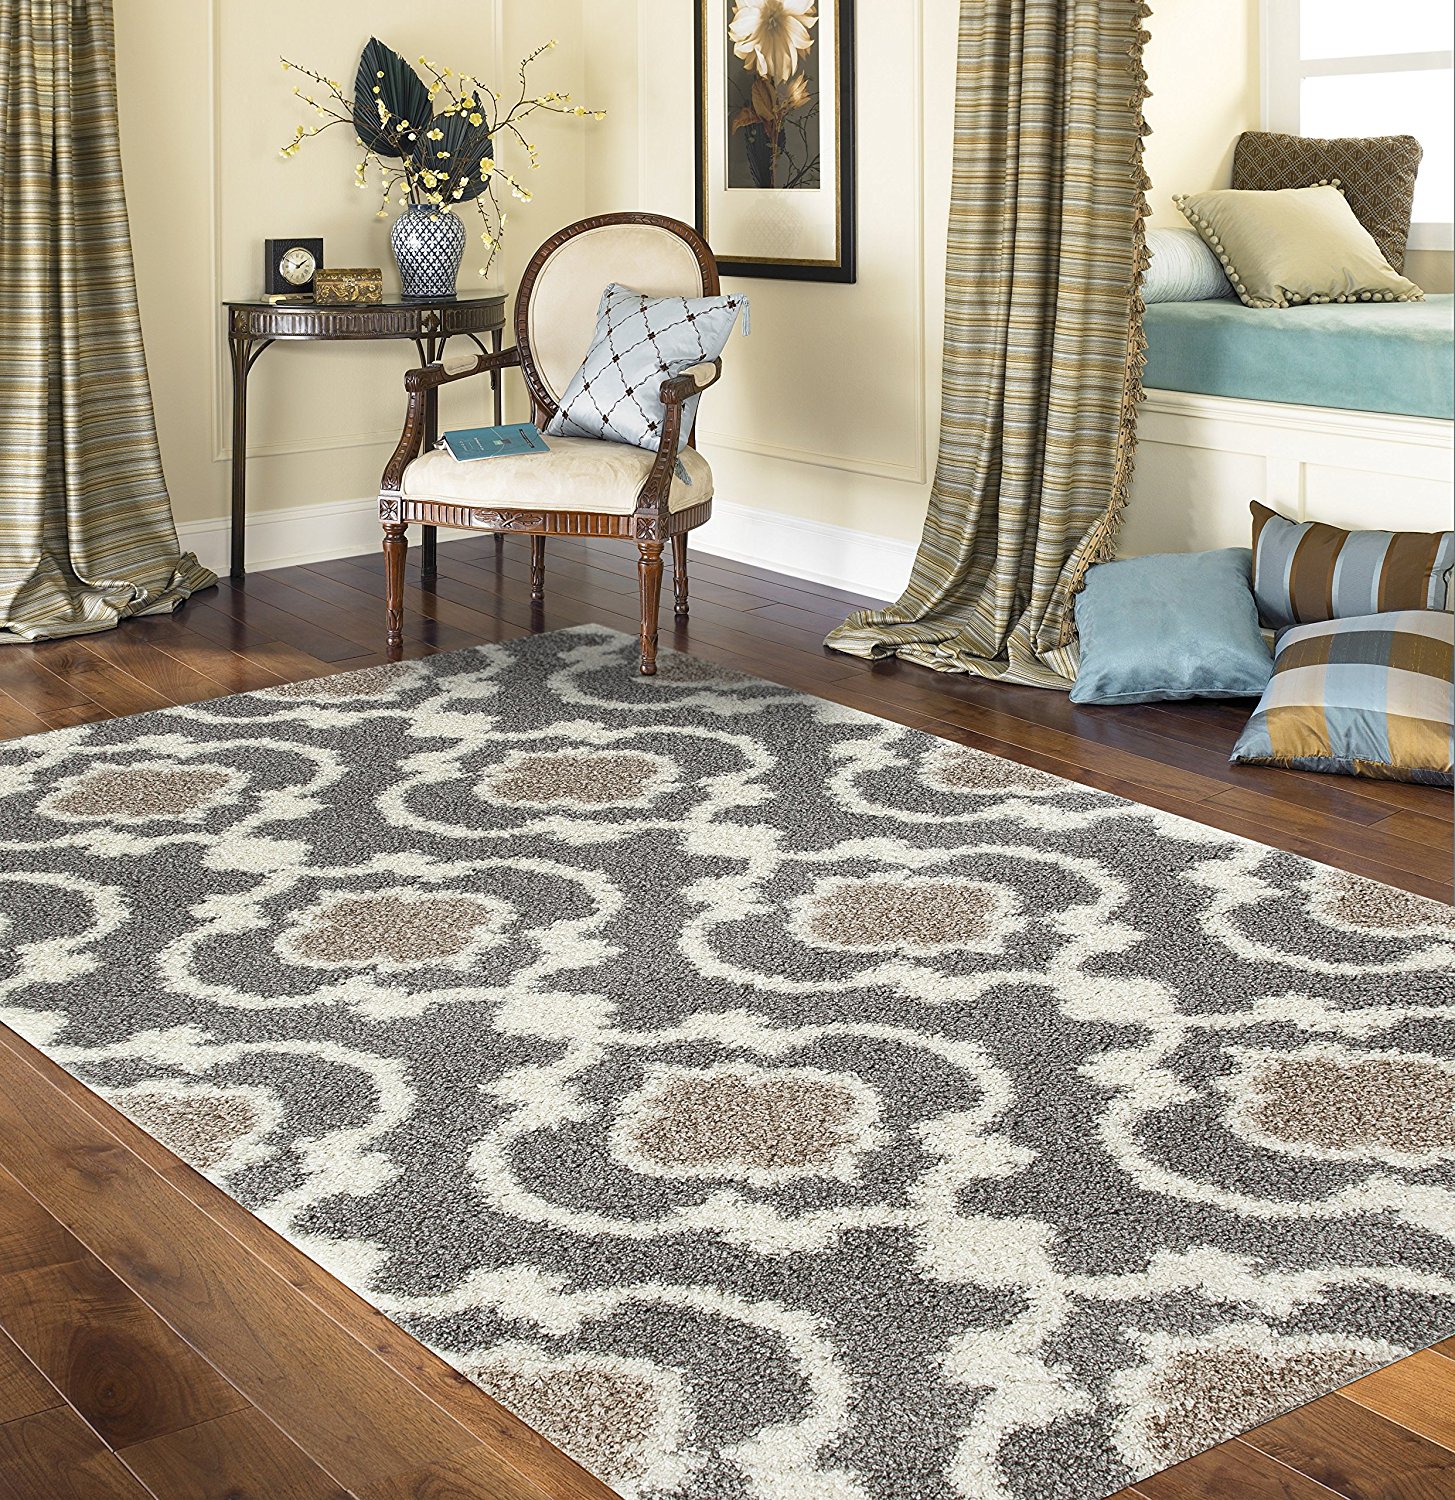 Using shag area rugs is quite beneficial for your house